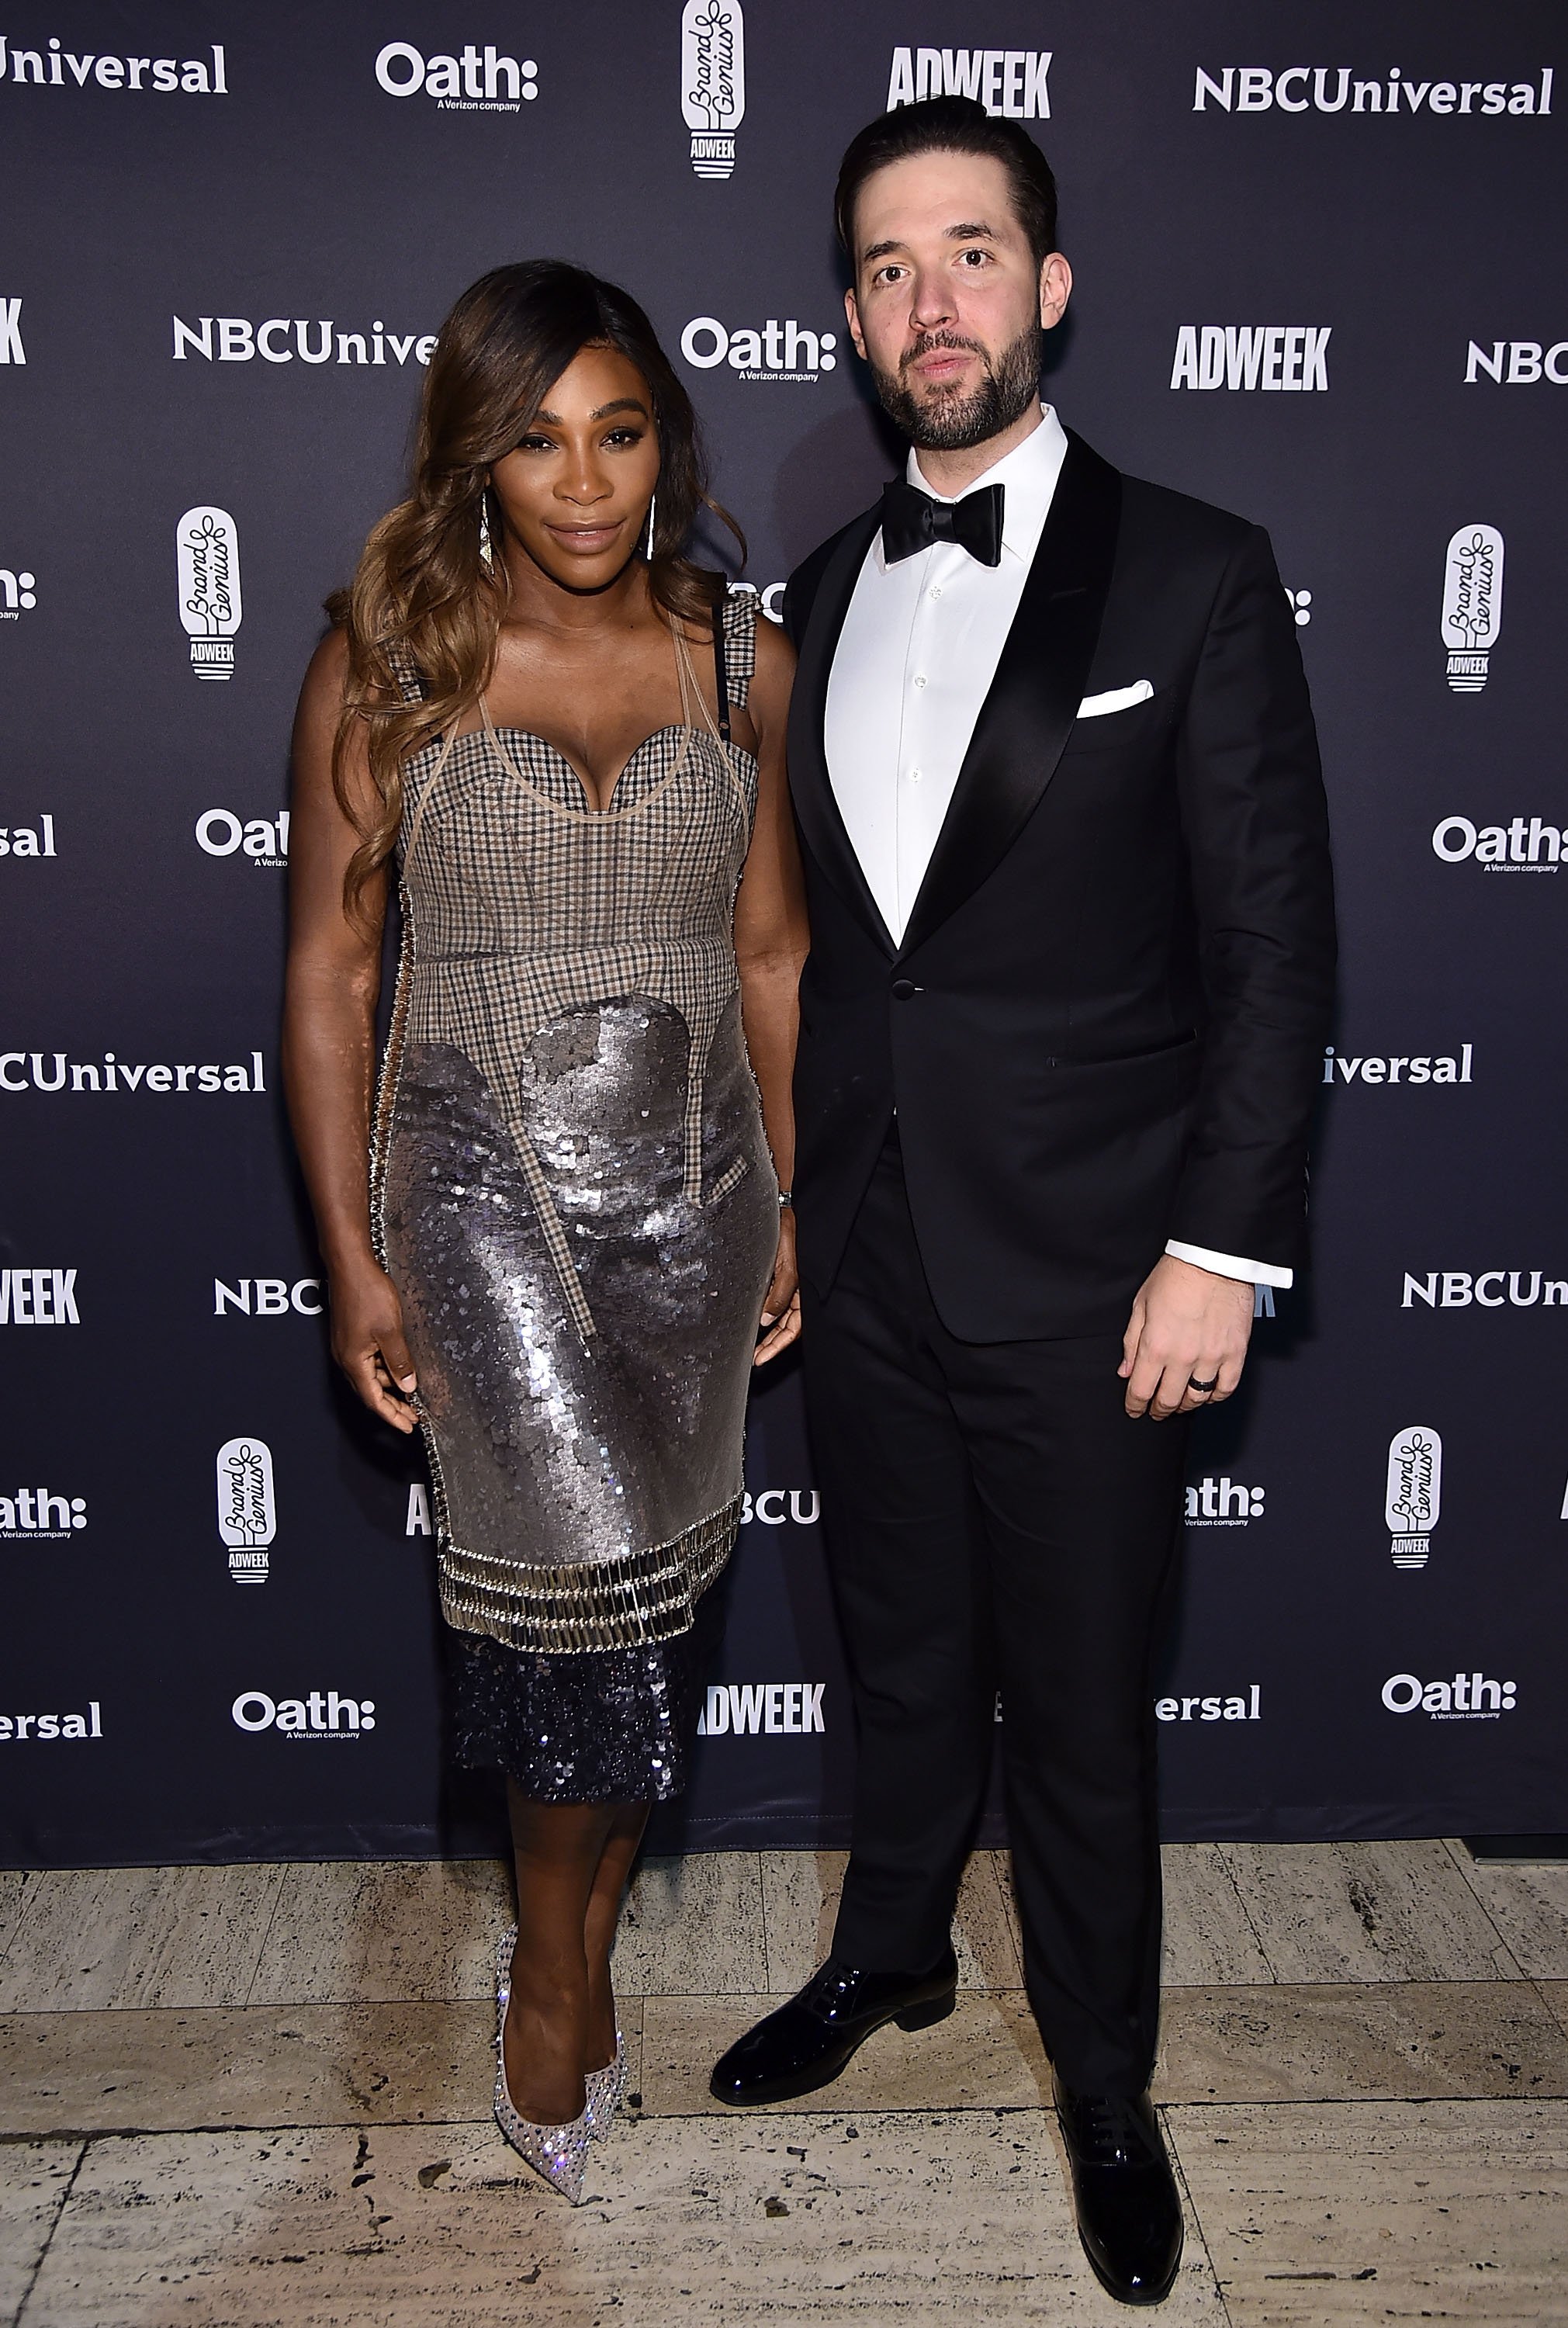 Serena Williams and Alexis Ohanian at the Brand Genius Awards on November 7, 2018, in New York City. | Source: Theo Wargo/Getty Images